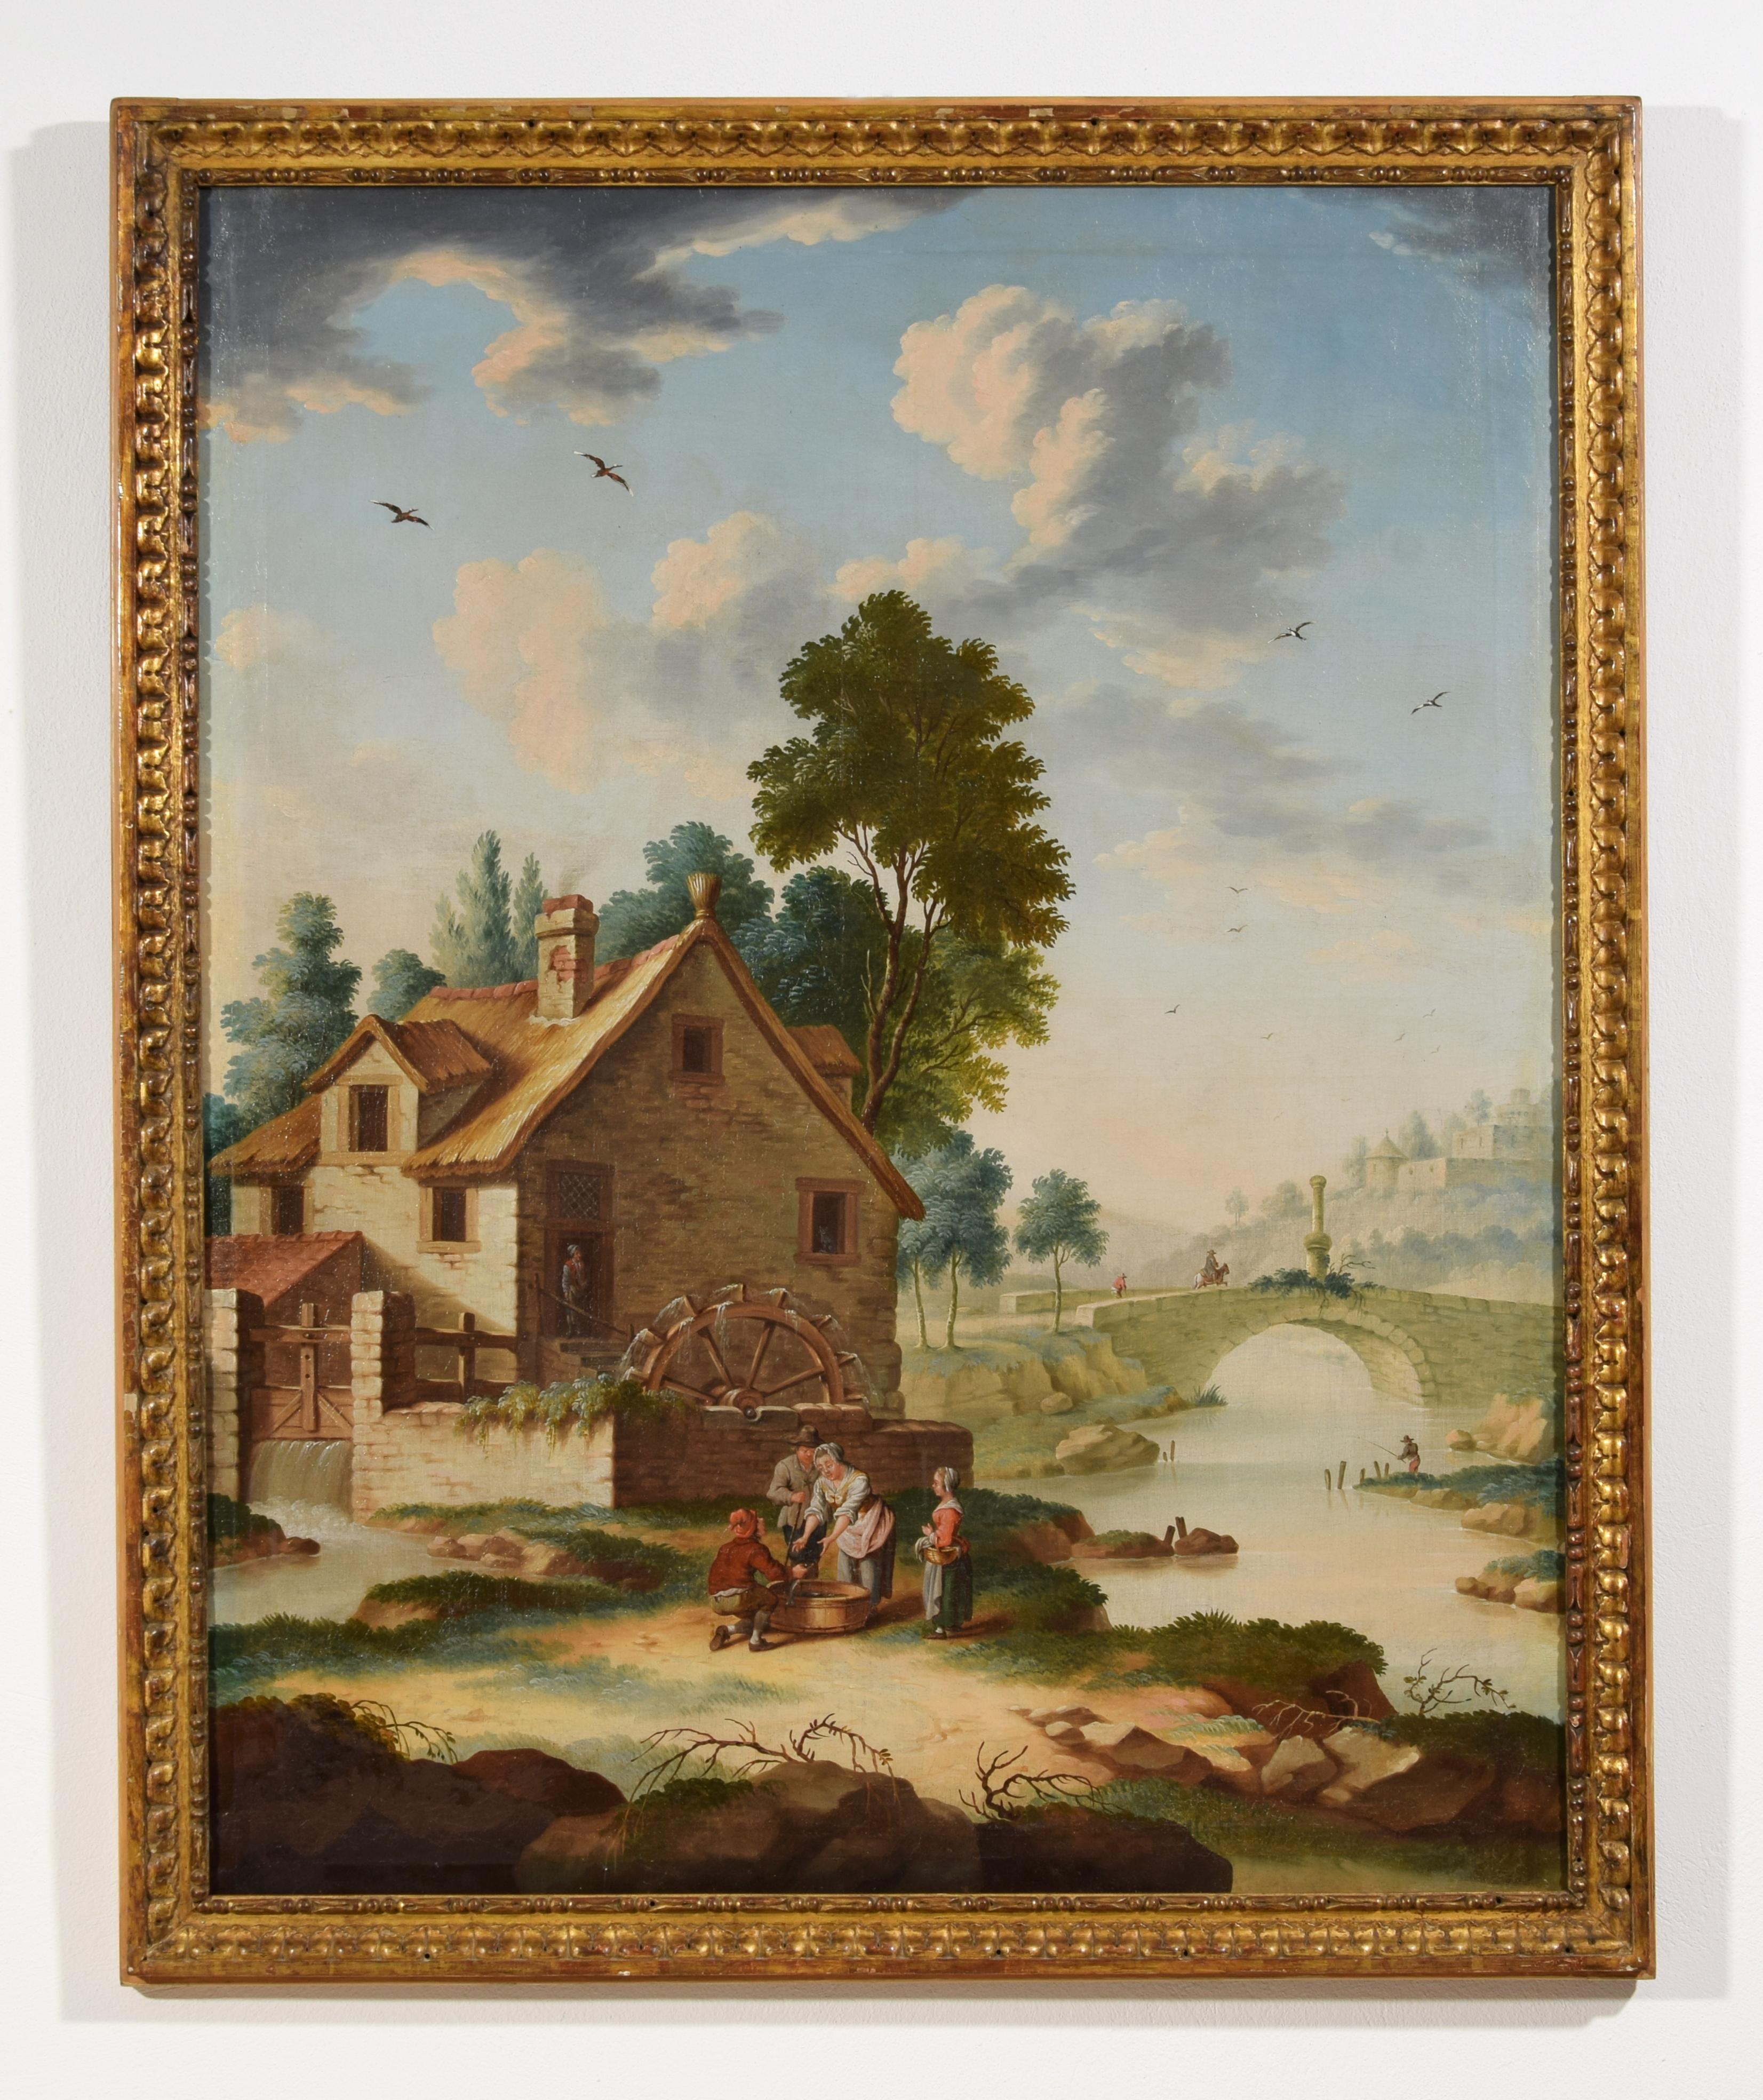 18th century, Italian painting depicting landscape with watermill and characters
Oil on canvas; Measurements: frame cm L 103.5 x H 127 x P 5; painting L 93 x H 117.5

The painting, made in oil on canvas in Piedmont, north of Italy, around the